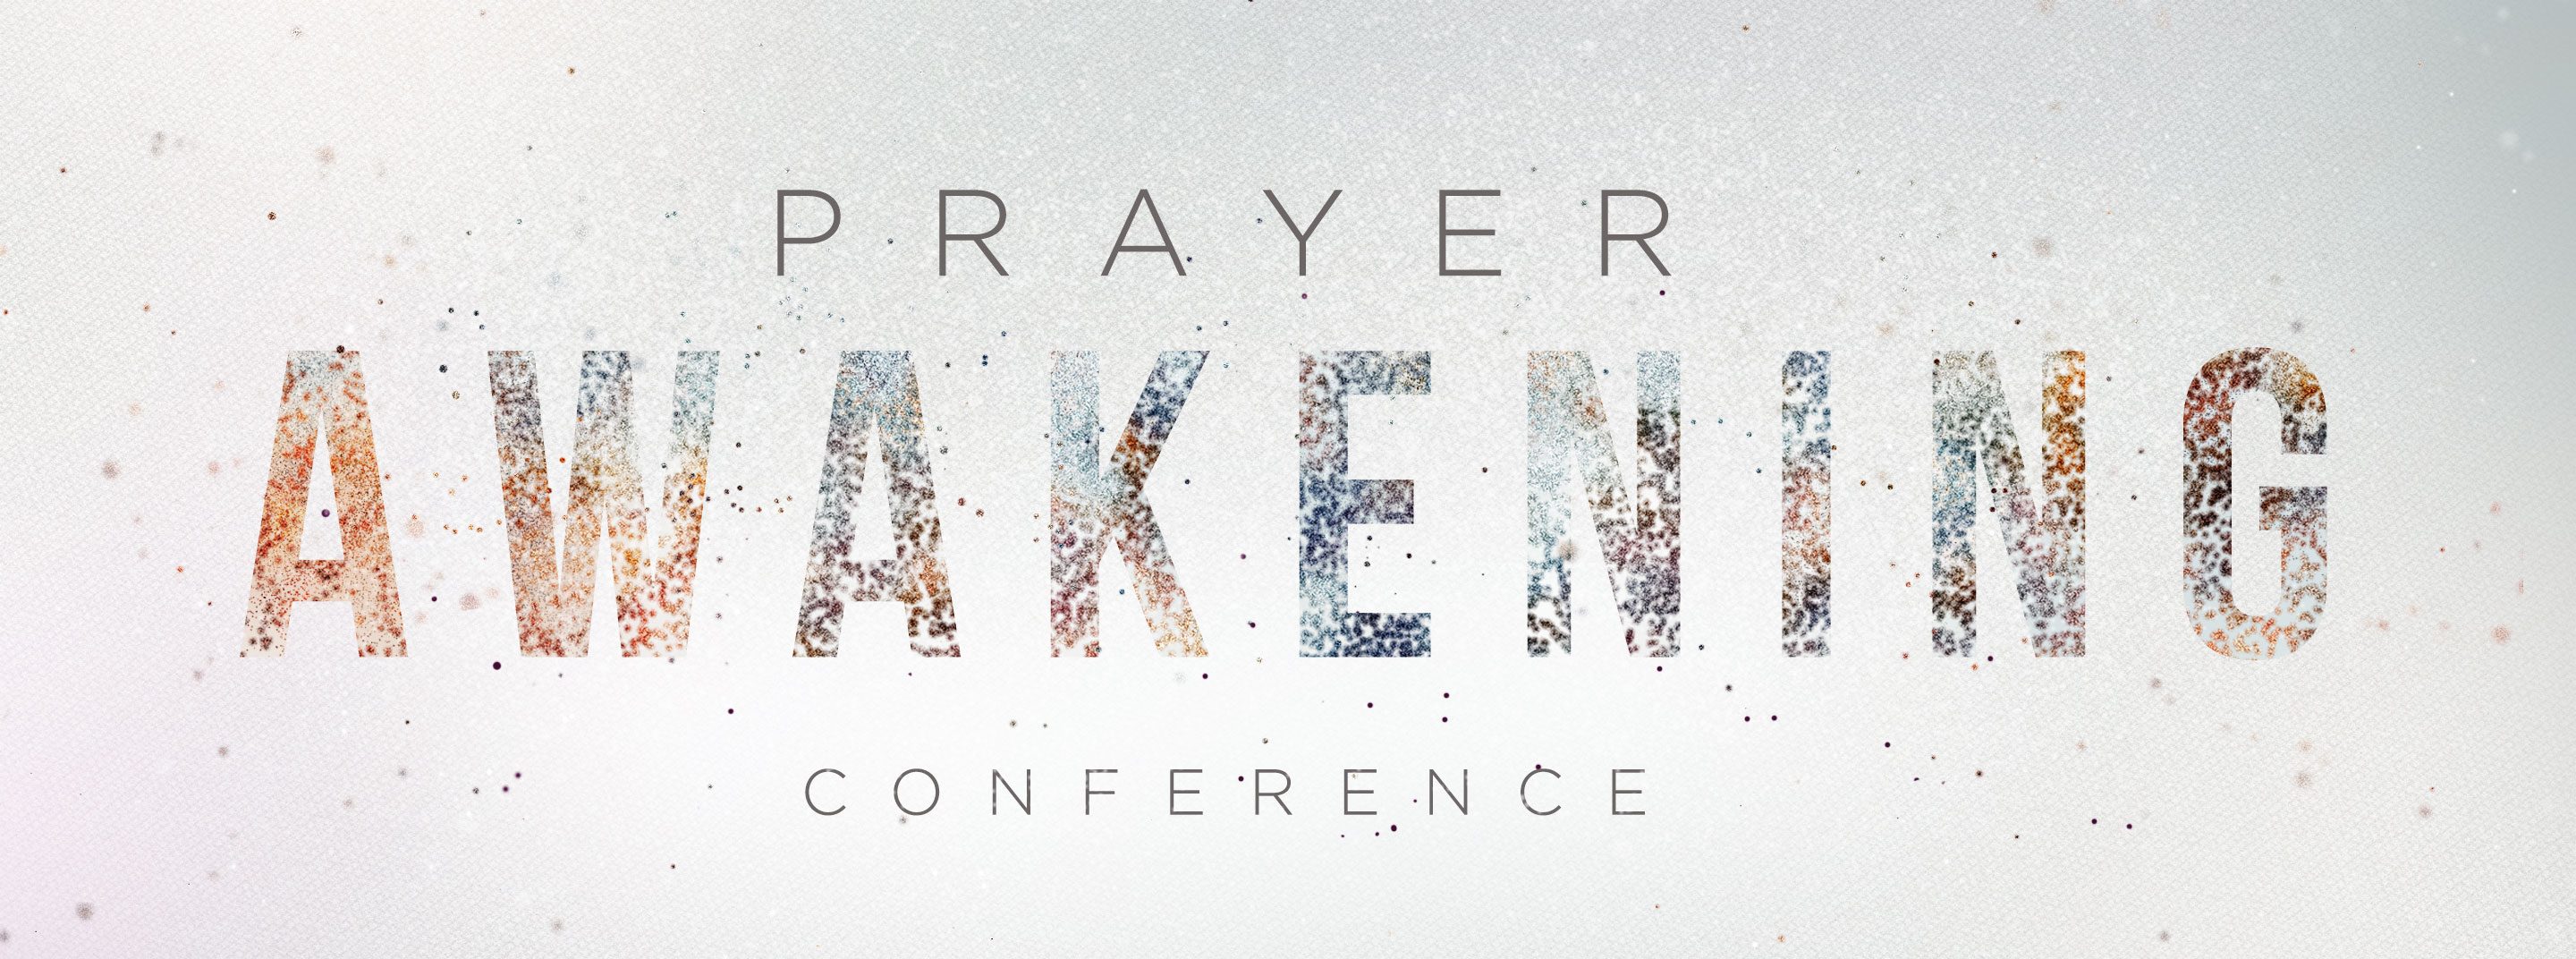 awaken conference messages